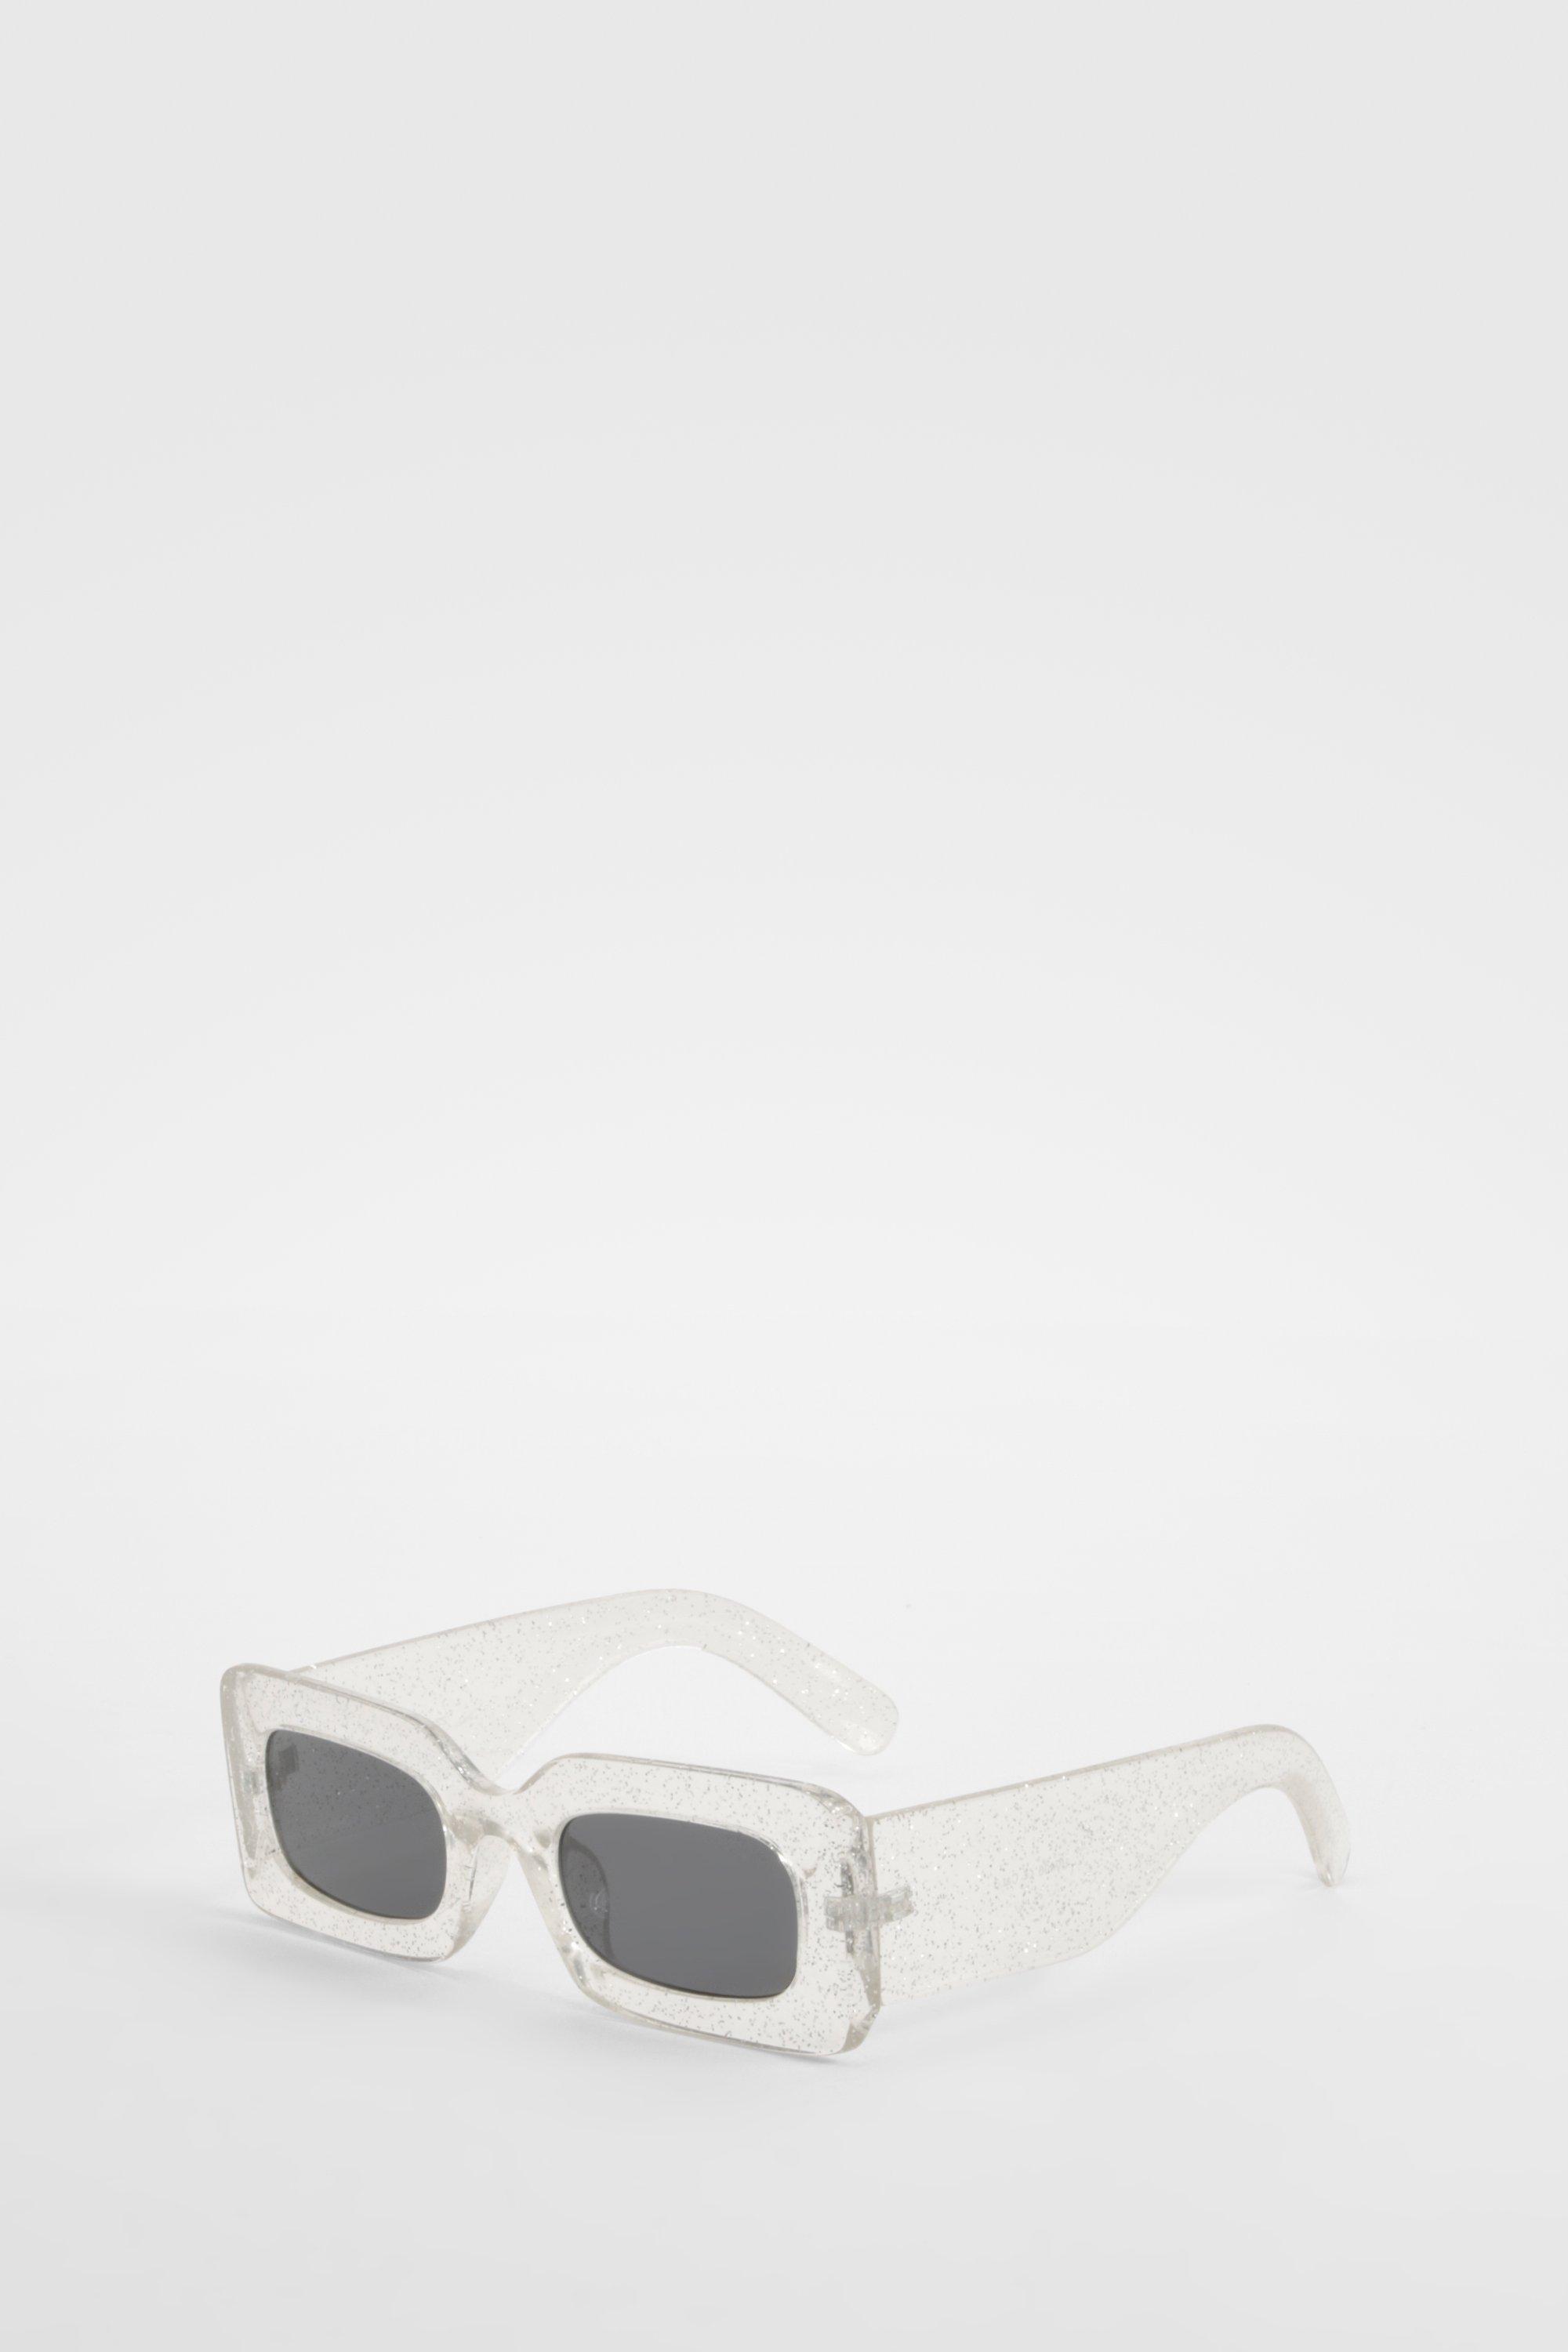 Image of Clear Frame Sunglasses, Bianco